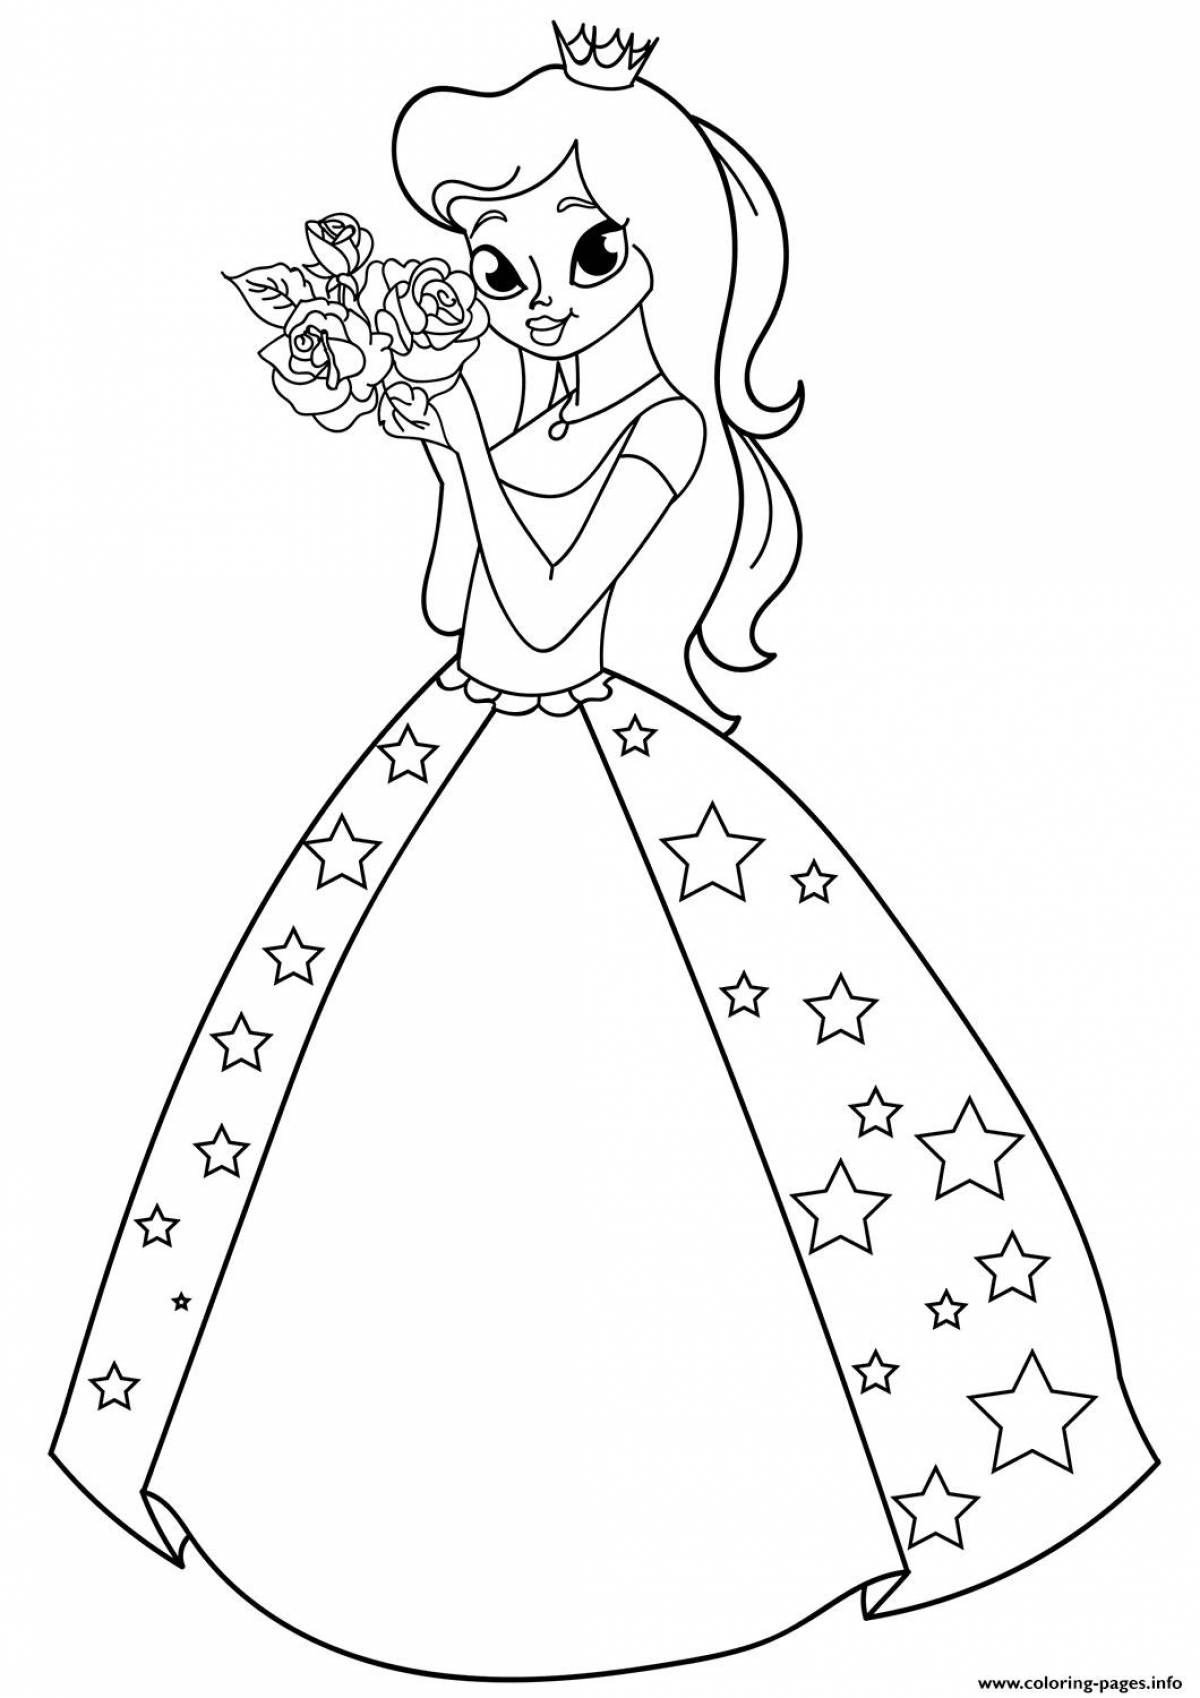 Dazzling princess coloring pages for kids